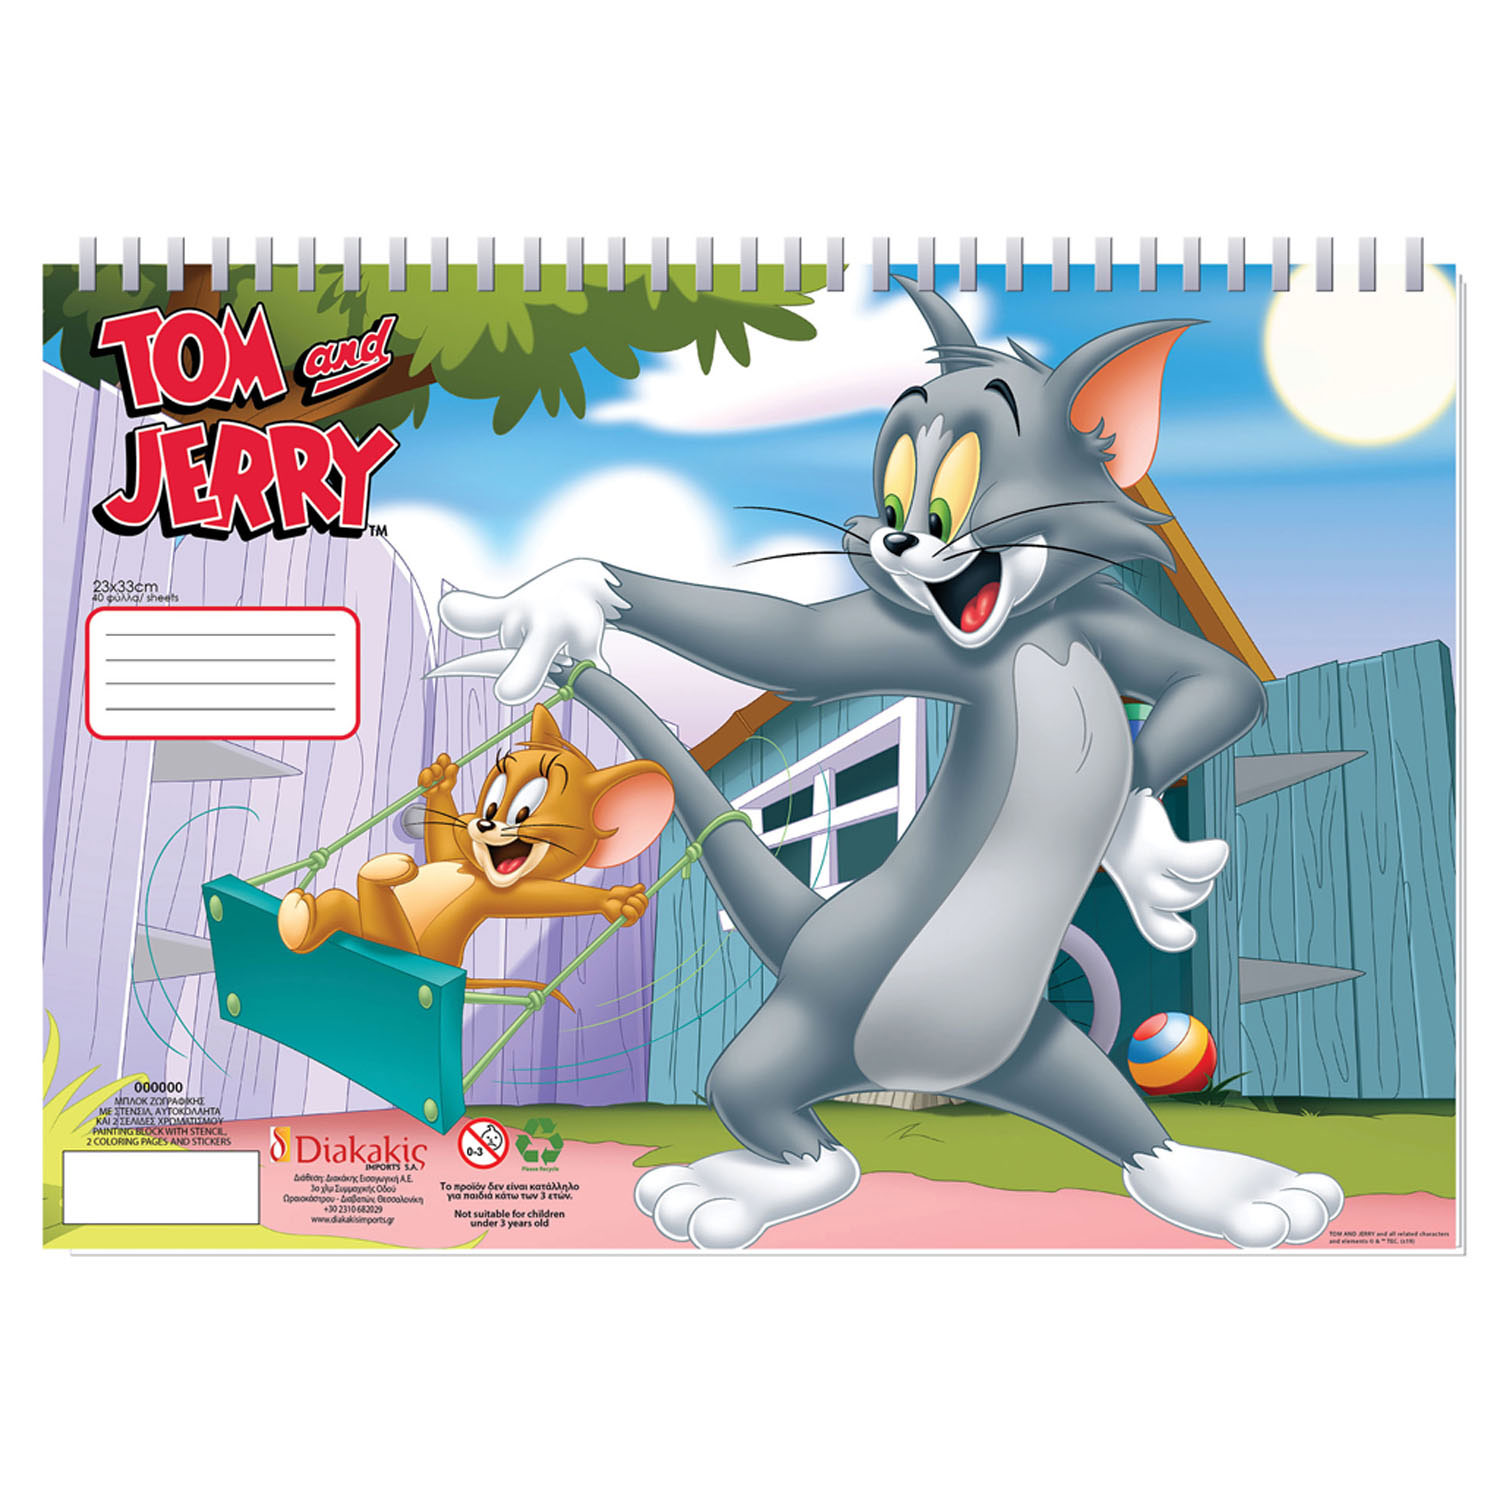 Tom and Jerry Layout Drawings - ID:octtomjerry0358 | Van Eaton Galleries